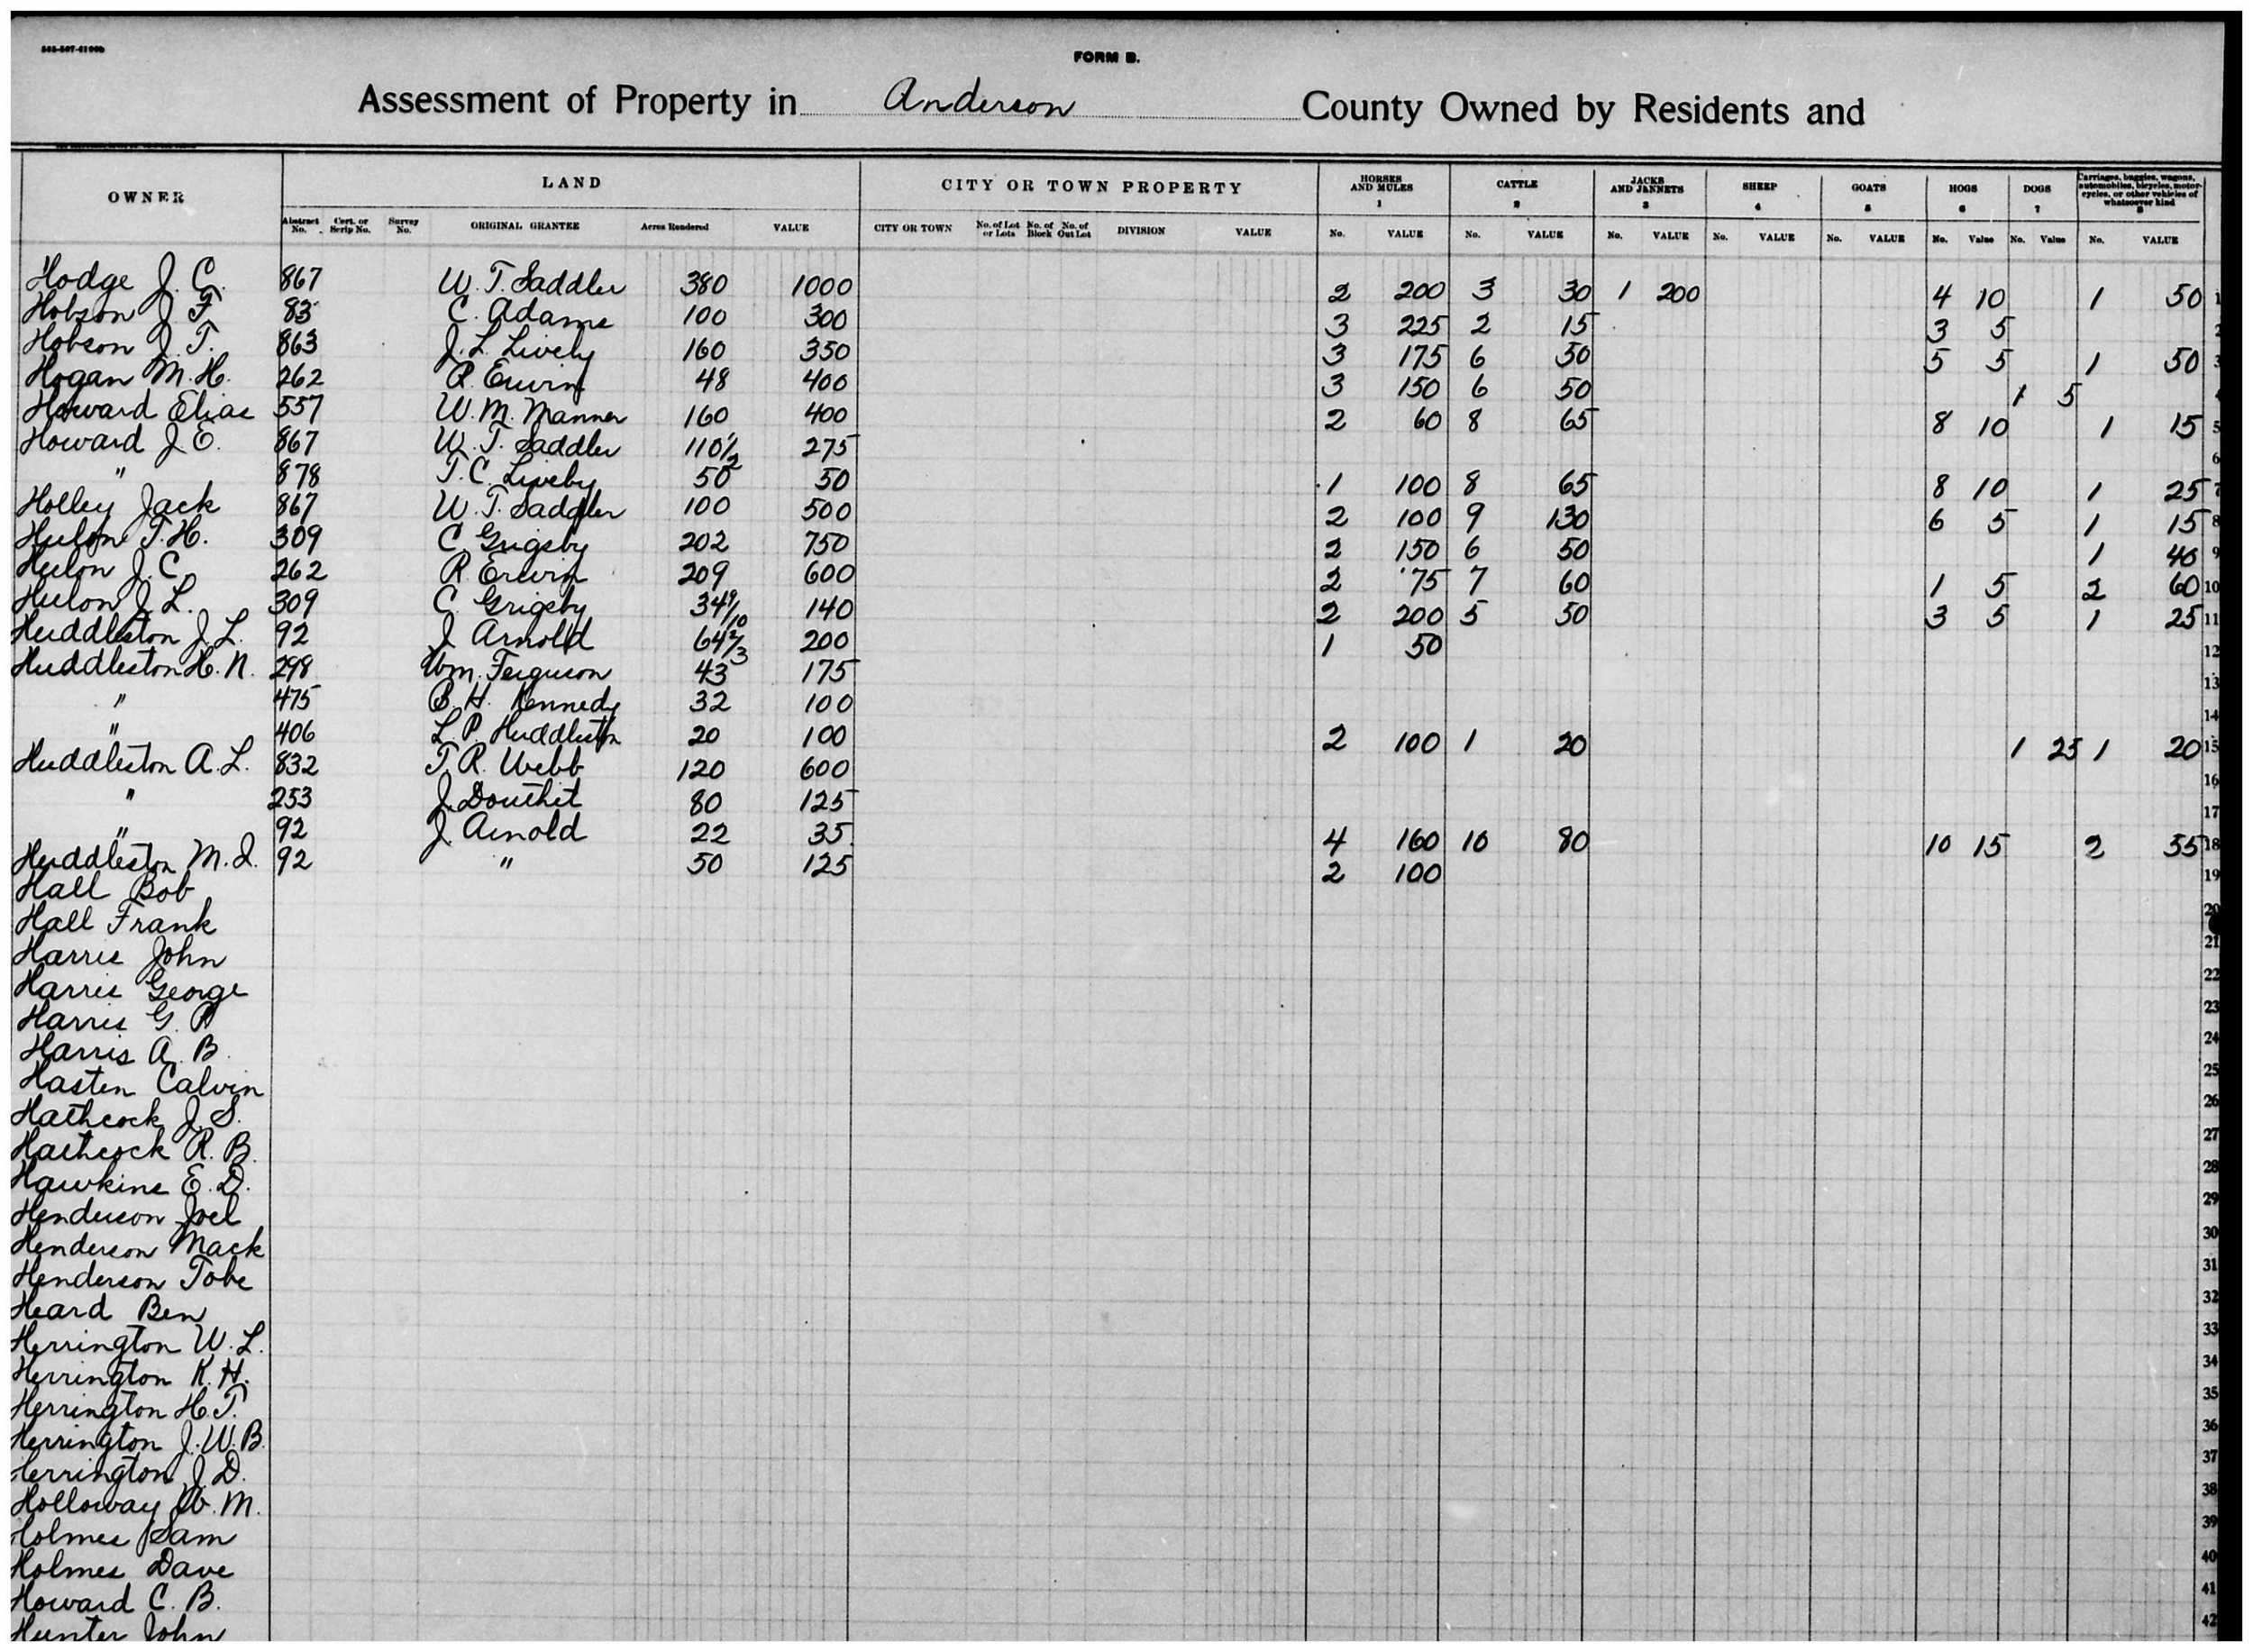  1908 Anderson County Tax Rolls (Line 8 shows Jack Holley's assessment for 100 acres) (Anderson County Records, Thomason Special Collections, Newton Gresham Library, Sam Houston State University, Huntsville, Texas) 